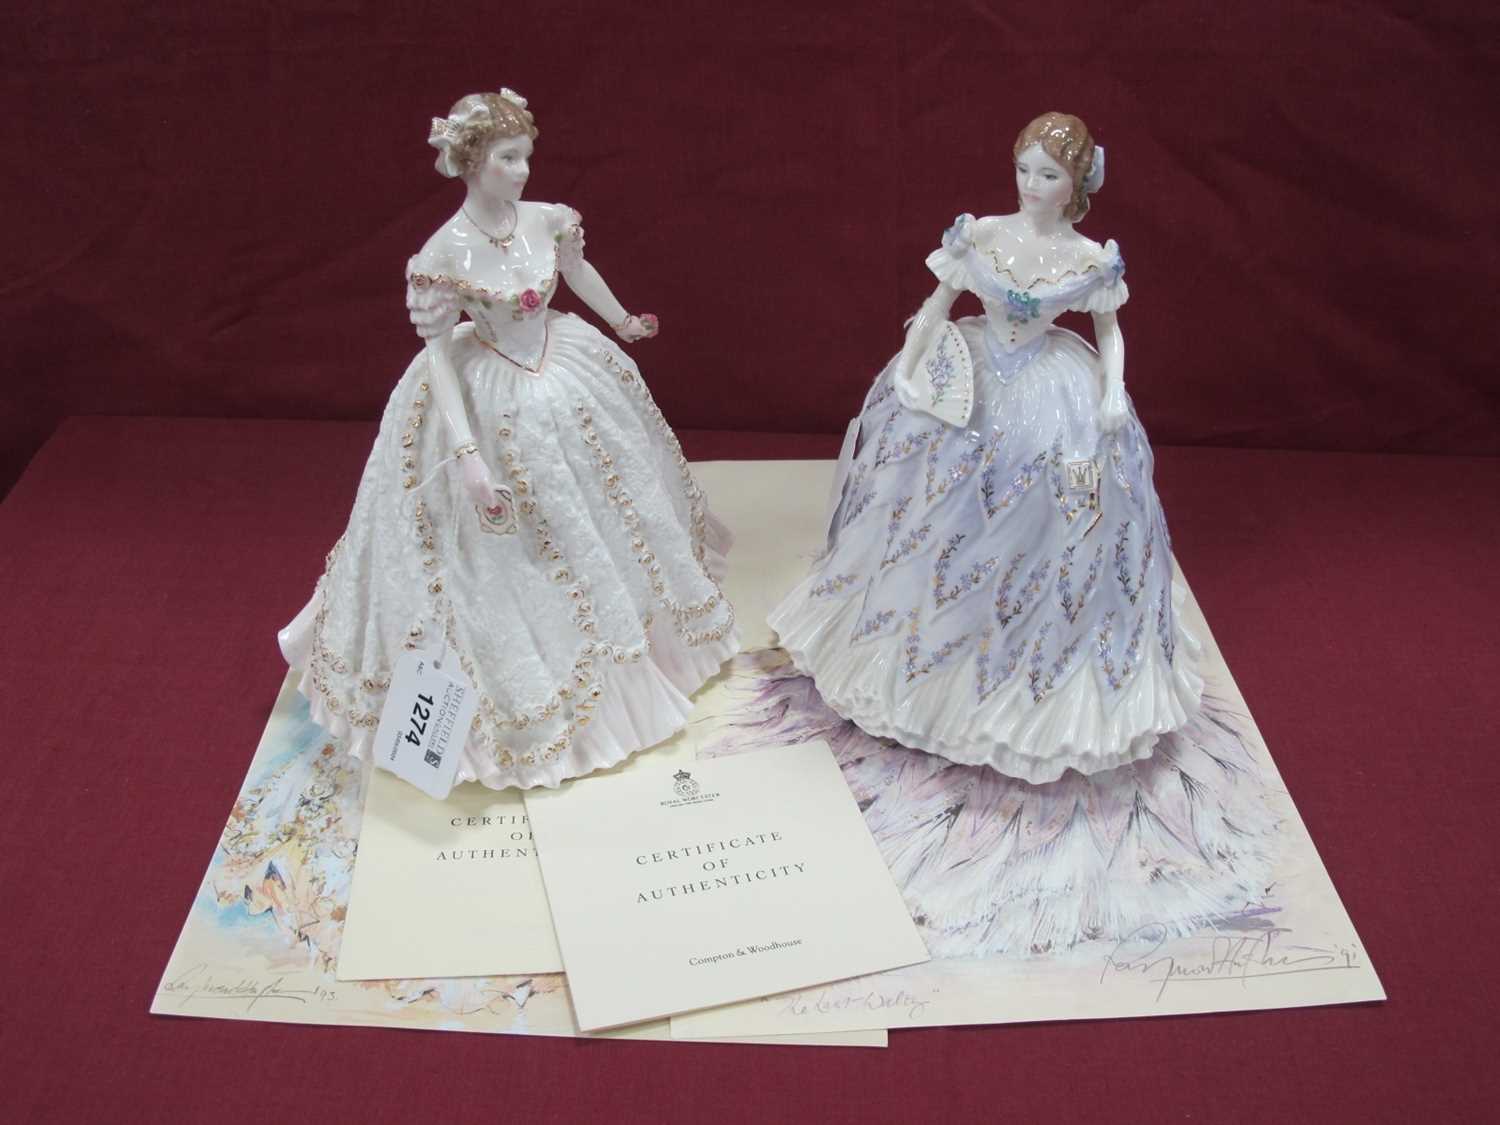 Royal Worcester Figurines 'The Last Waltz' and 'Sweetest Valentine' each limited edition of 12.500